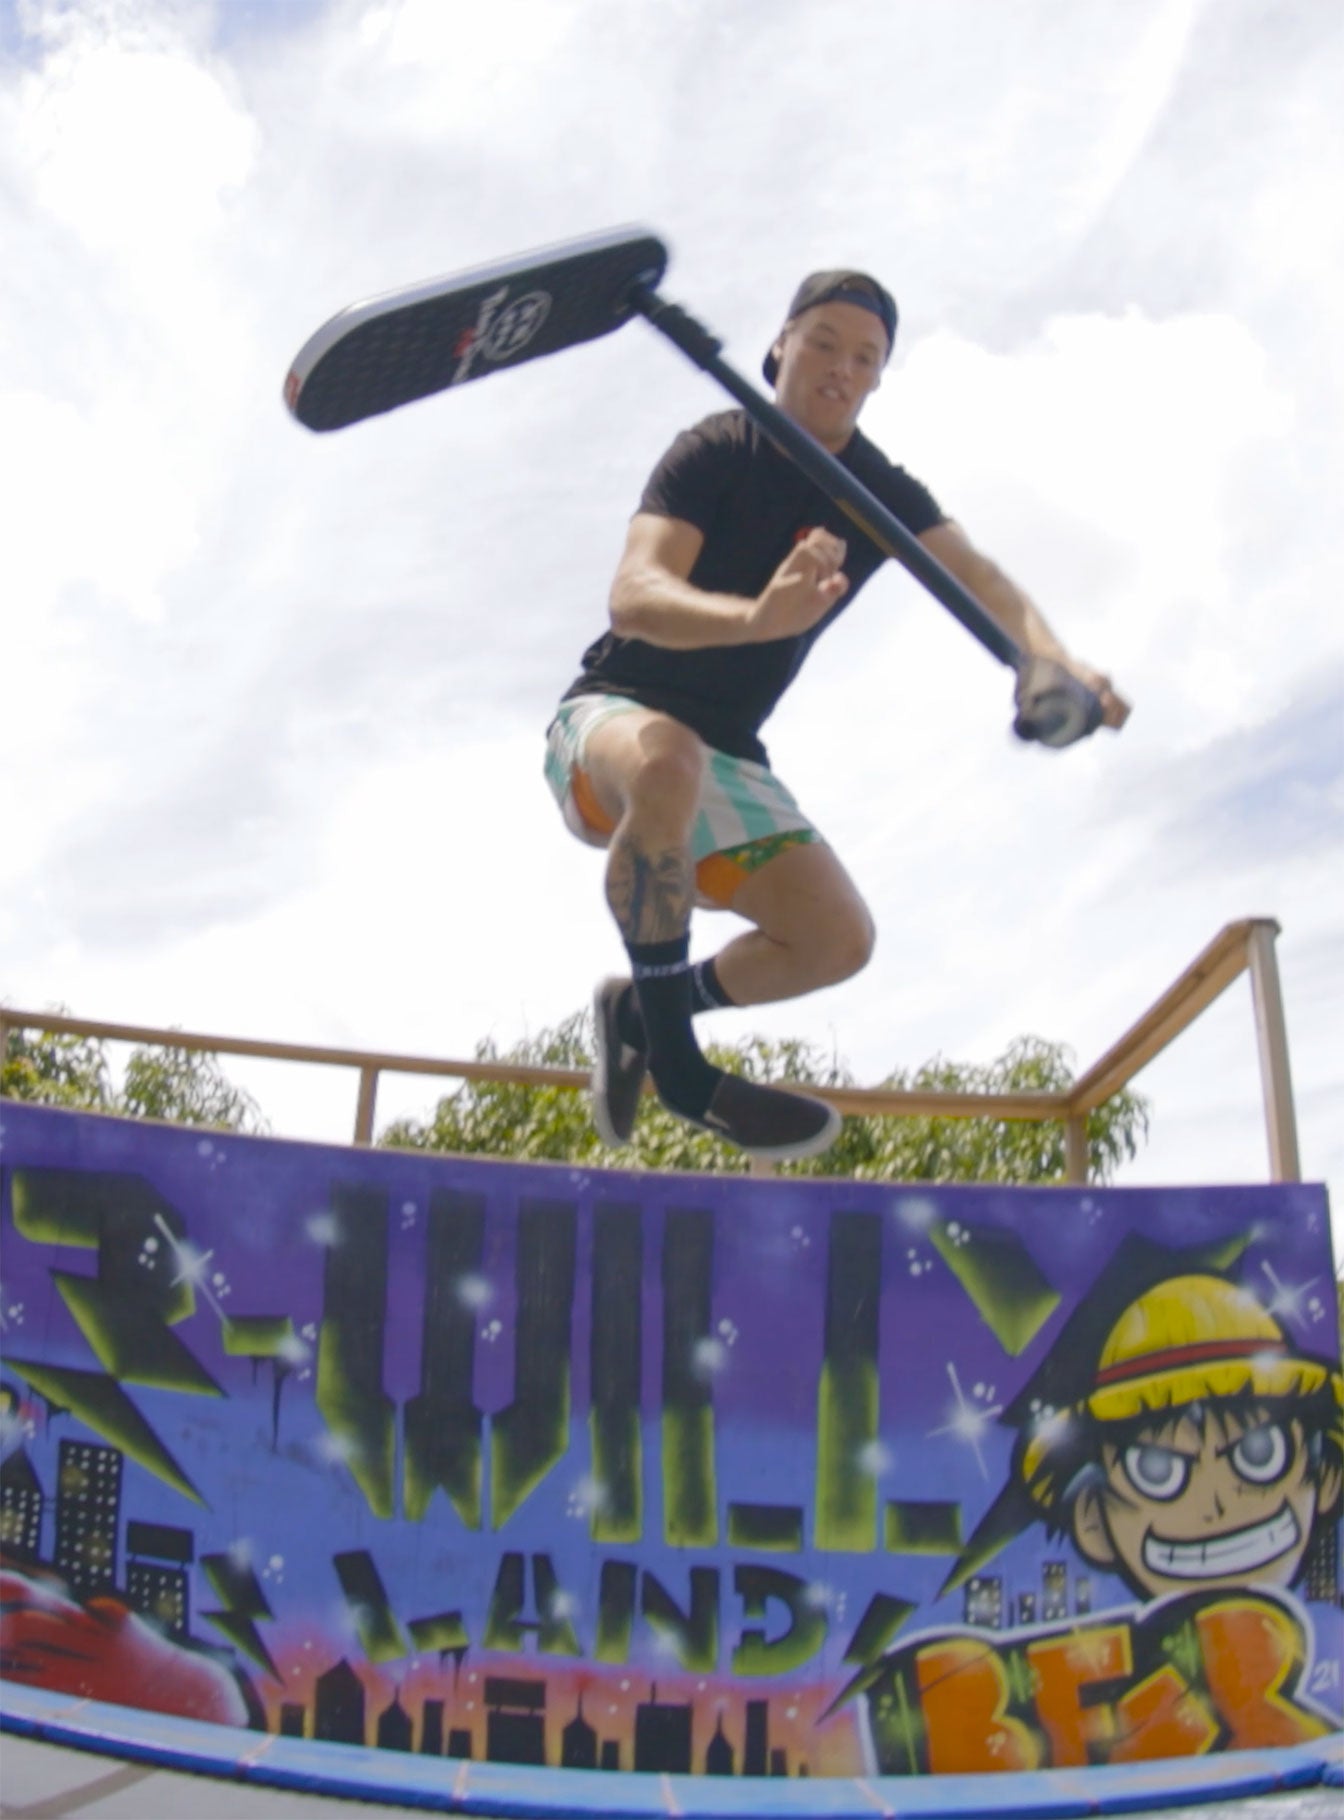 TrampScoot Pro - Trampoline Scooter